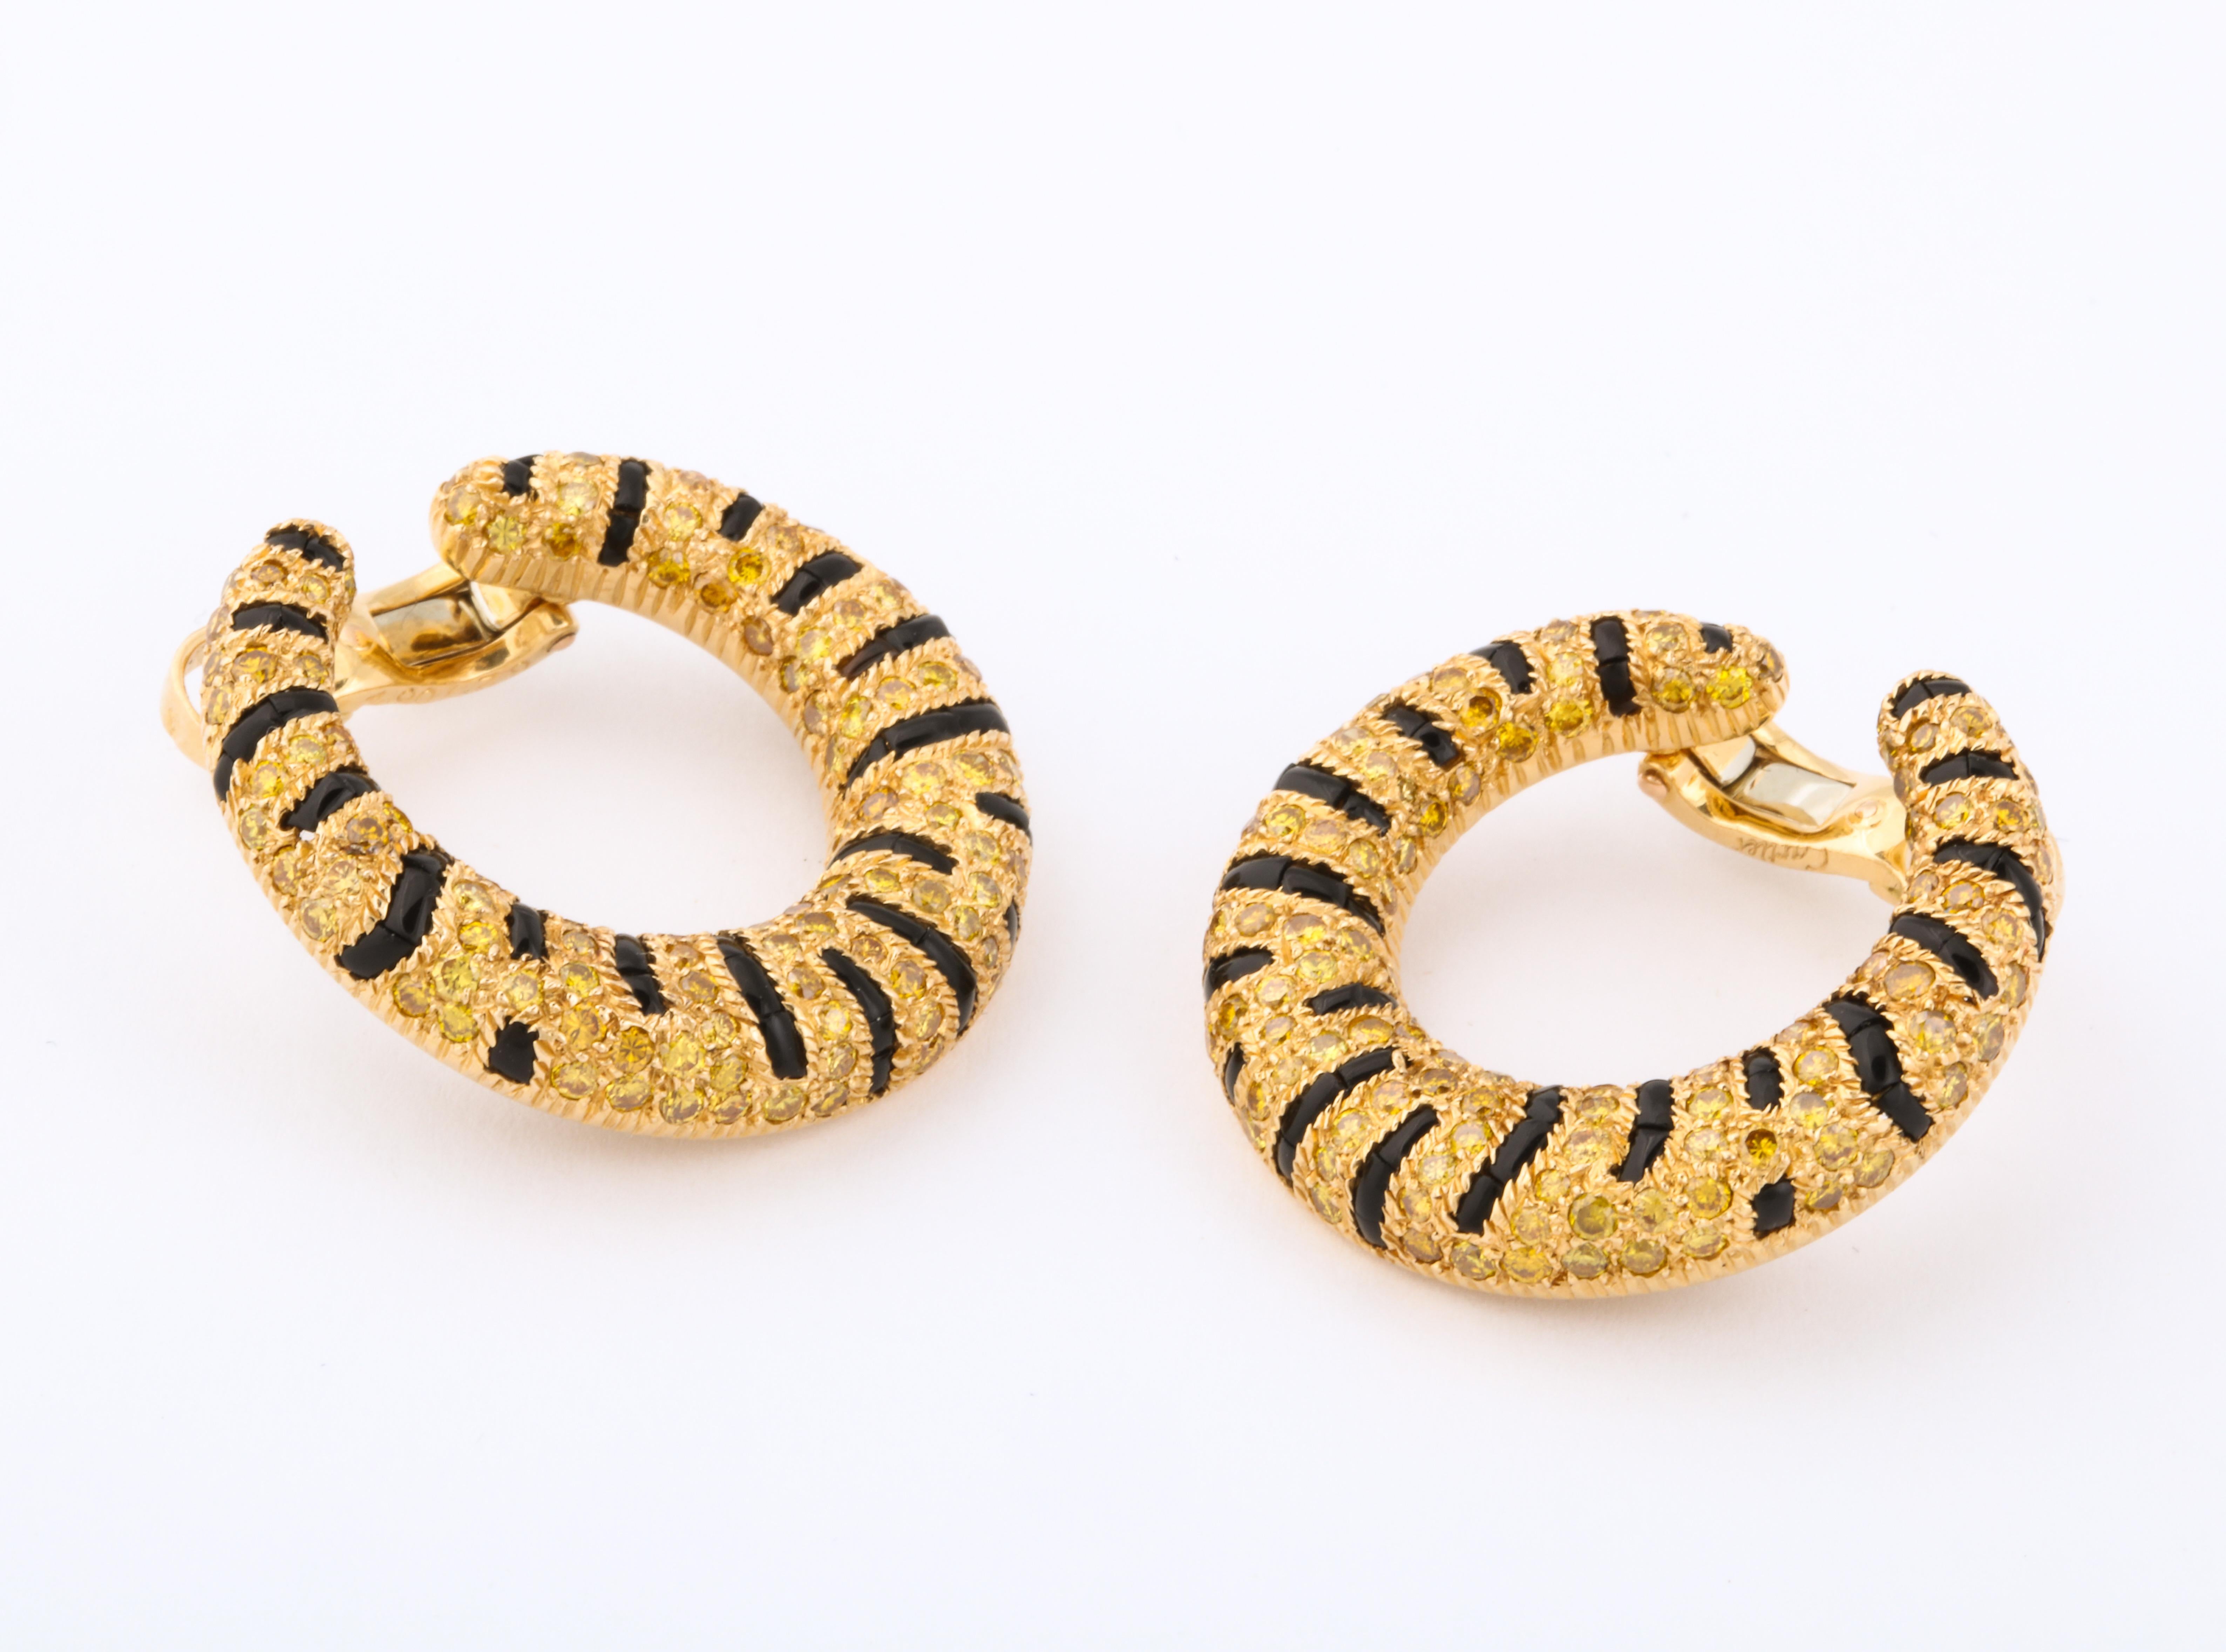 Cartier has always been well know for their big cat designs and, in addition to their iconic panther pieces, the tigers are infamous.  Famous examples were in The Duchess of Windsor's collection.  These earclips are the perfect combination of a